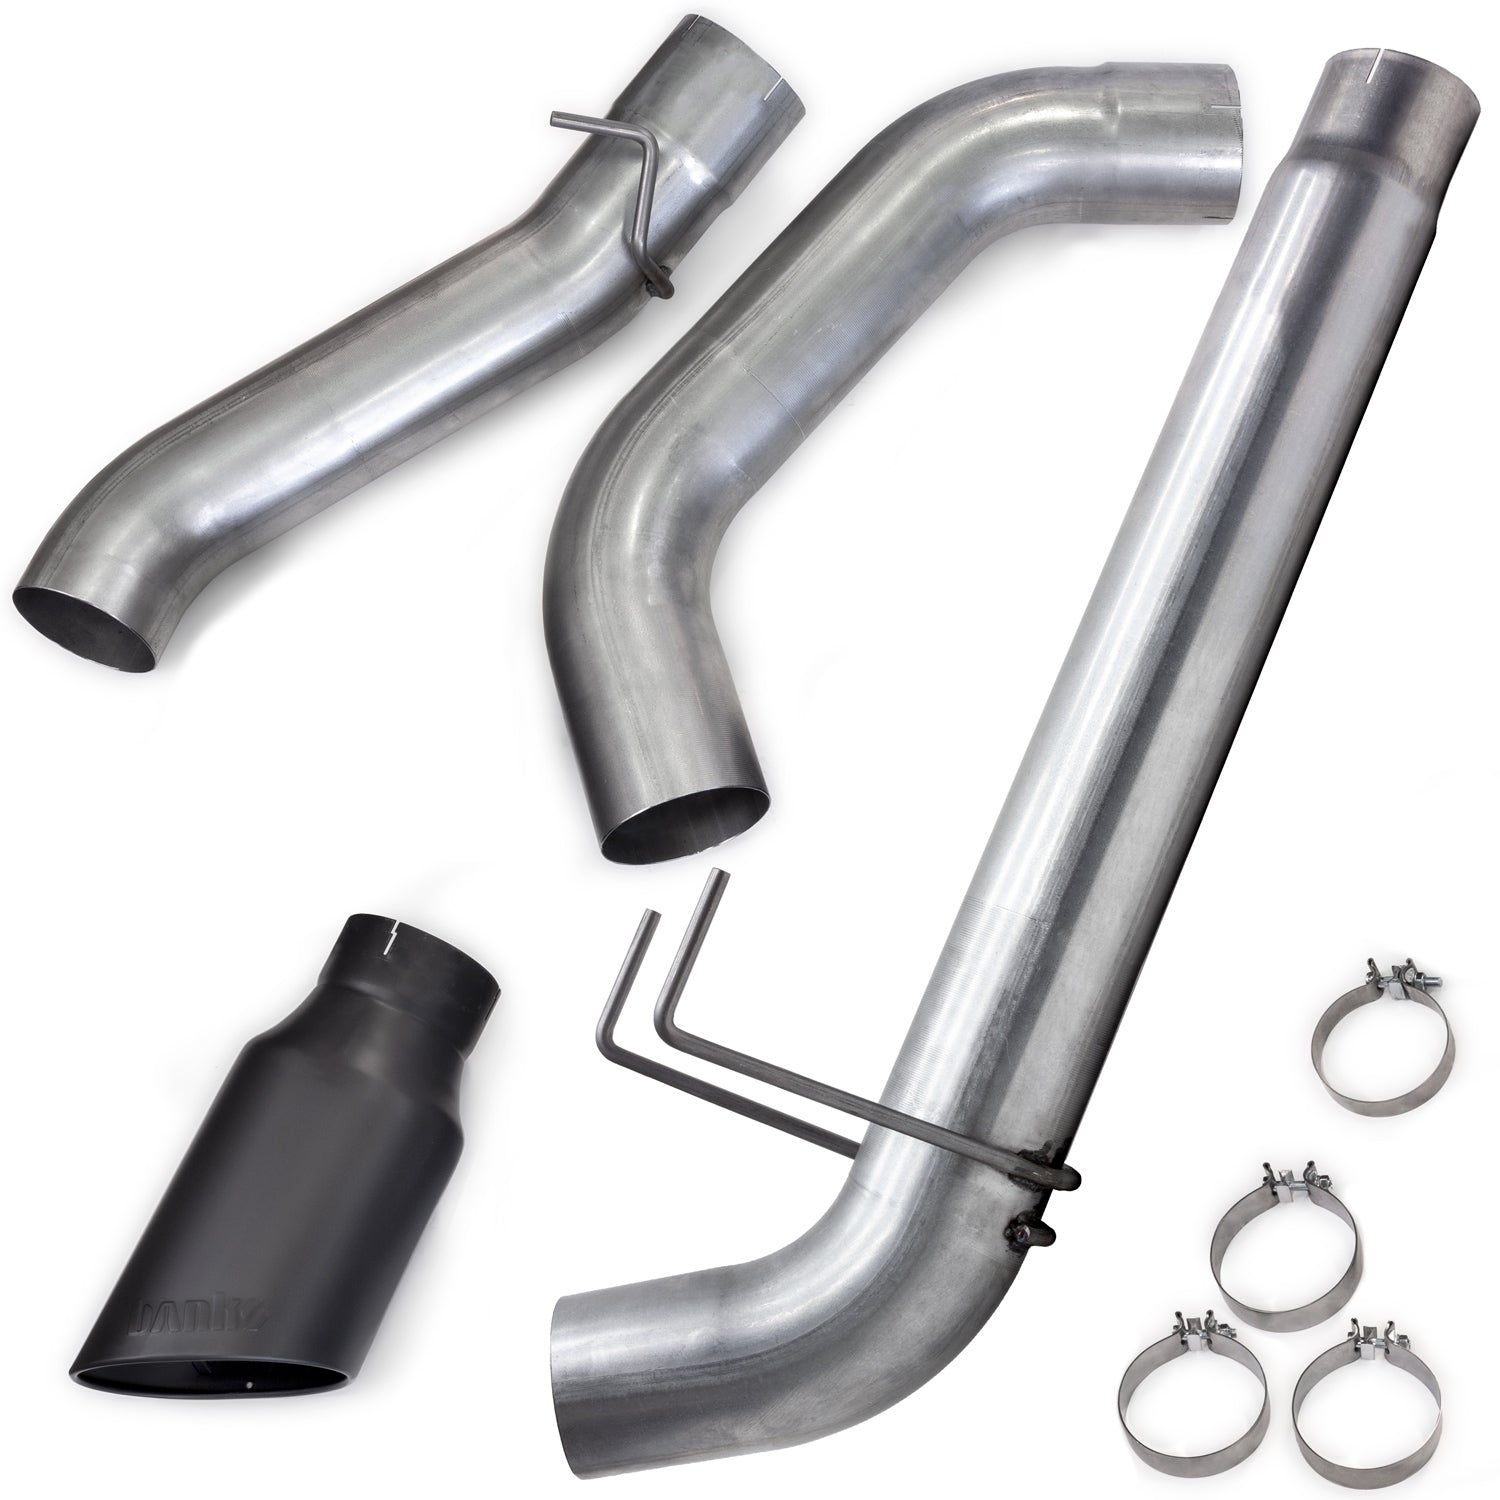 Components for 49907-B Monster-Exhaust 2019+ RAM 2500 & 3500 6.7L